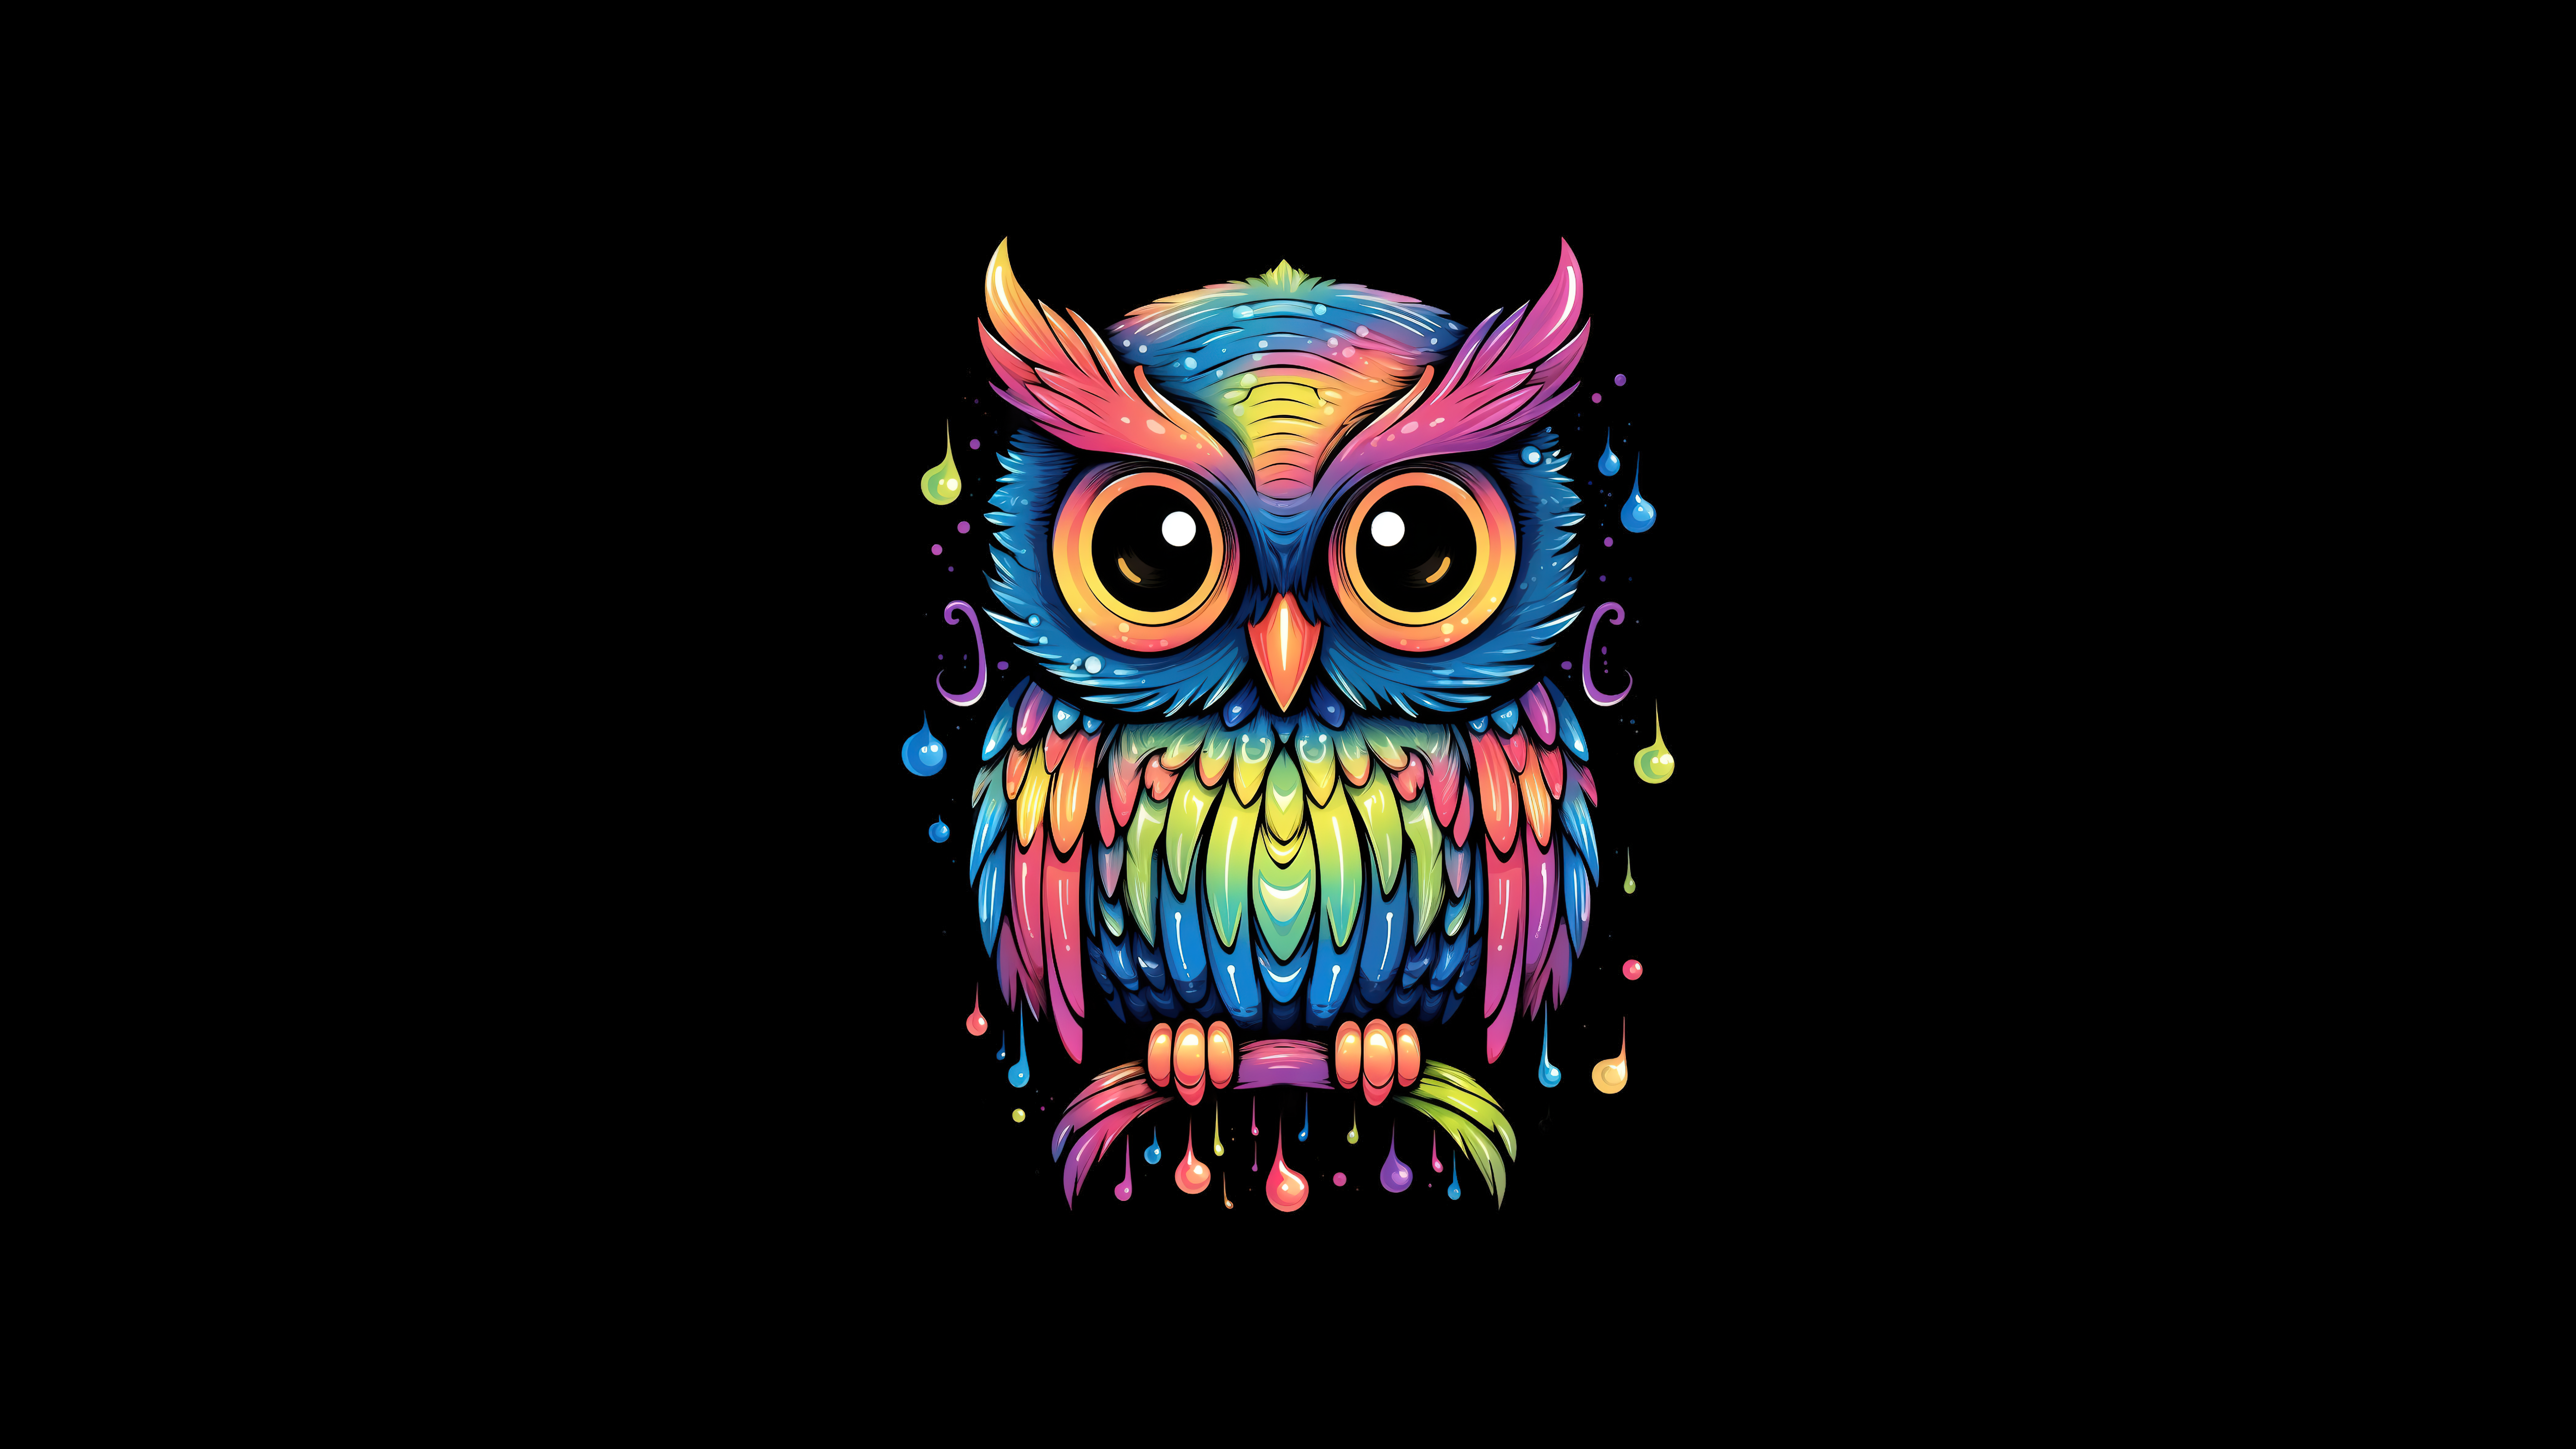 Owl House Aesthetic Wallpapers - Wallpaper Cave